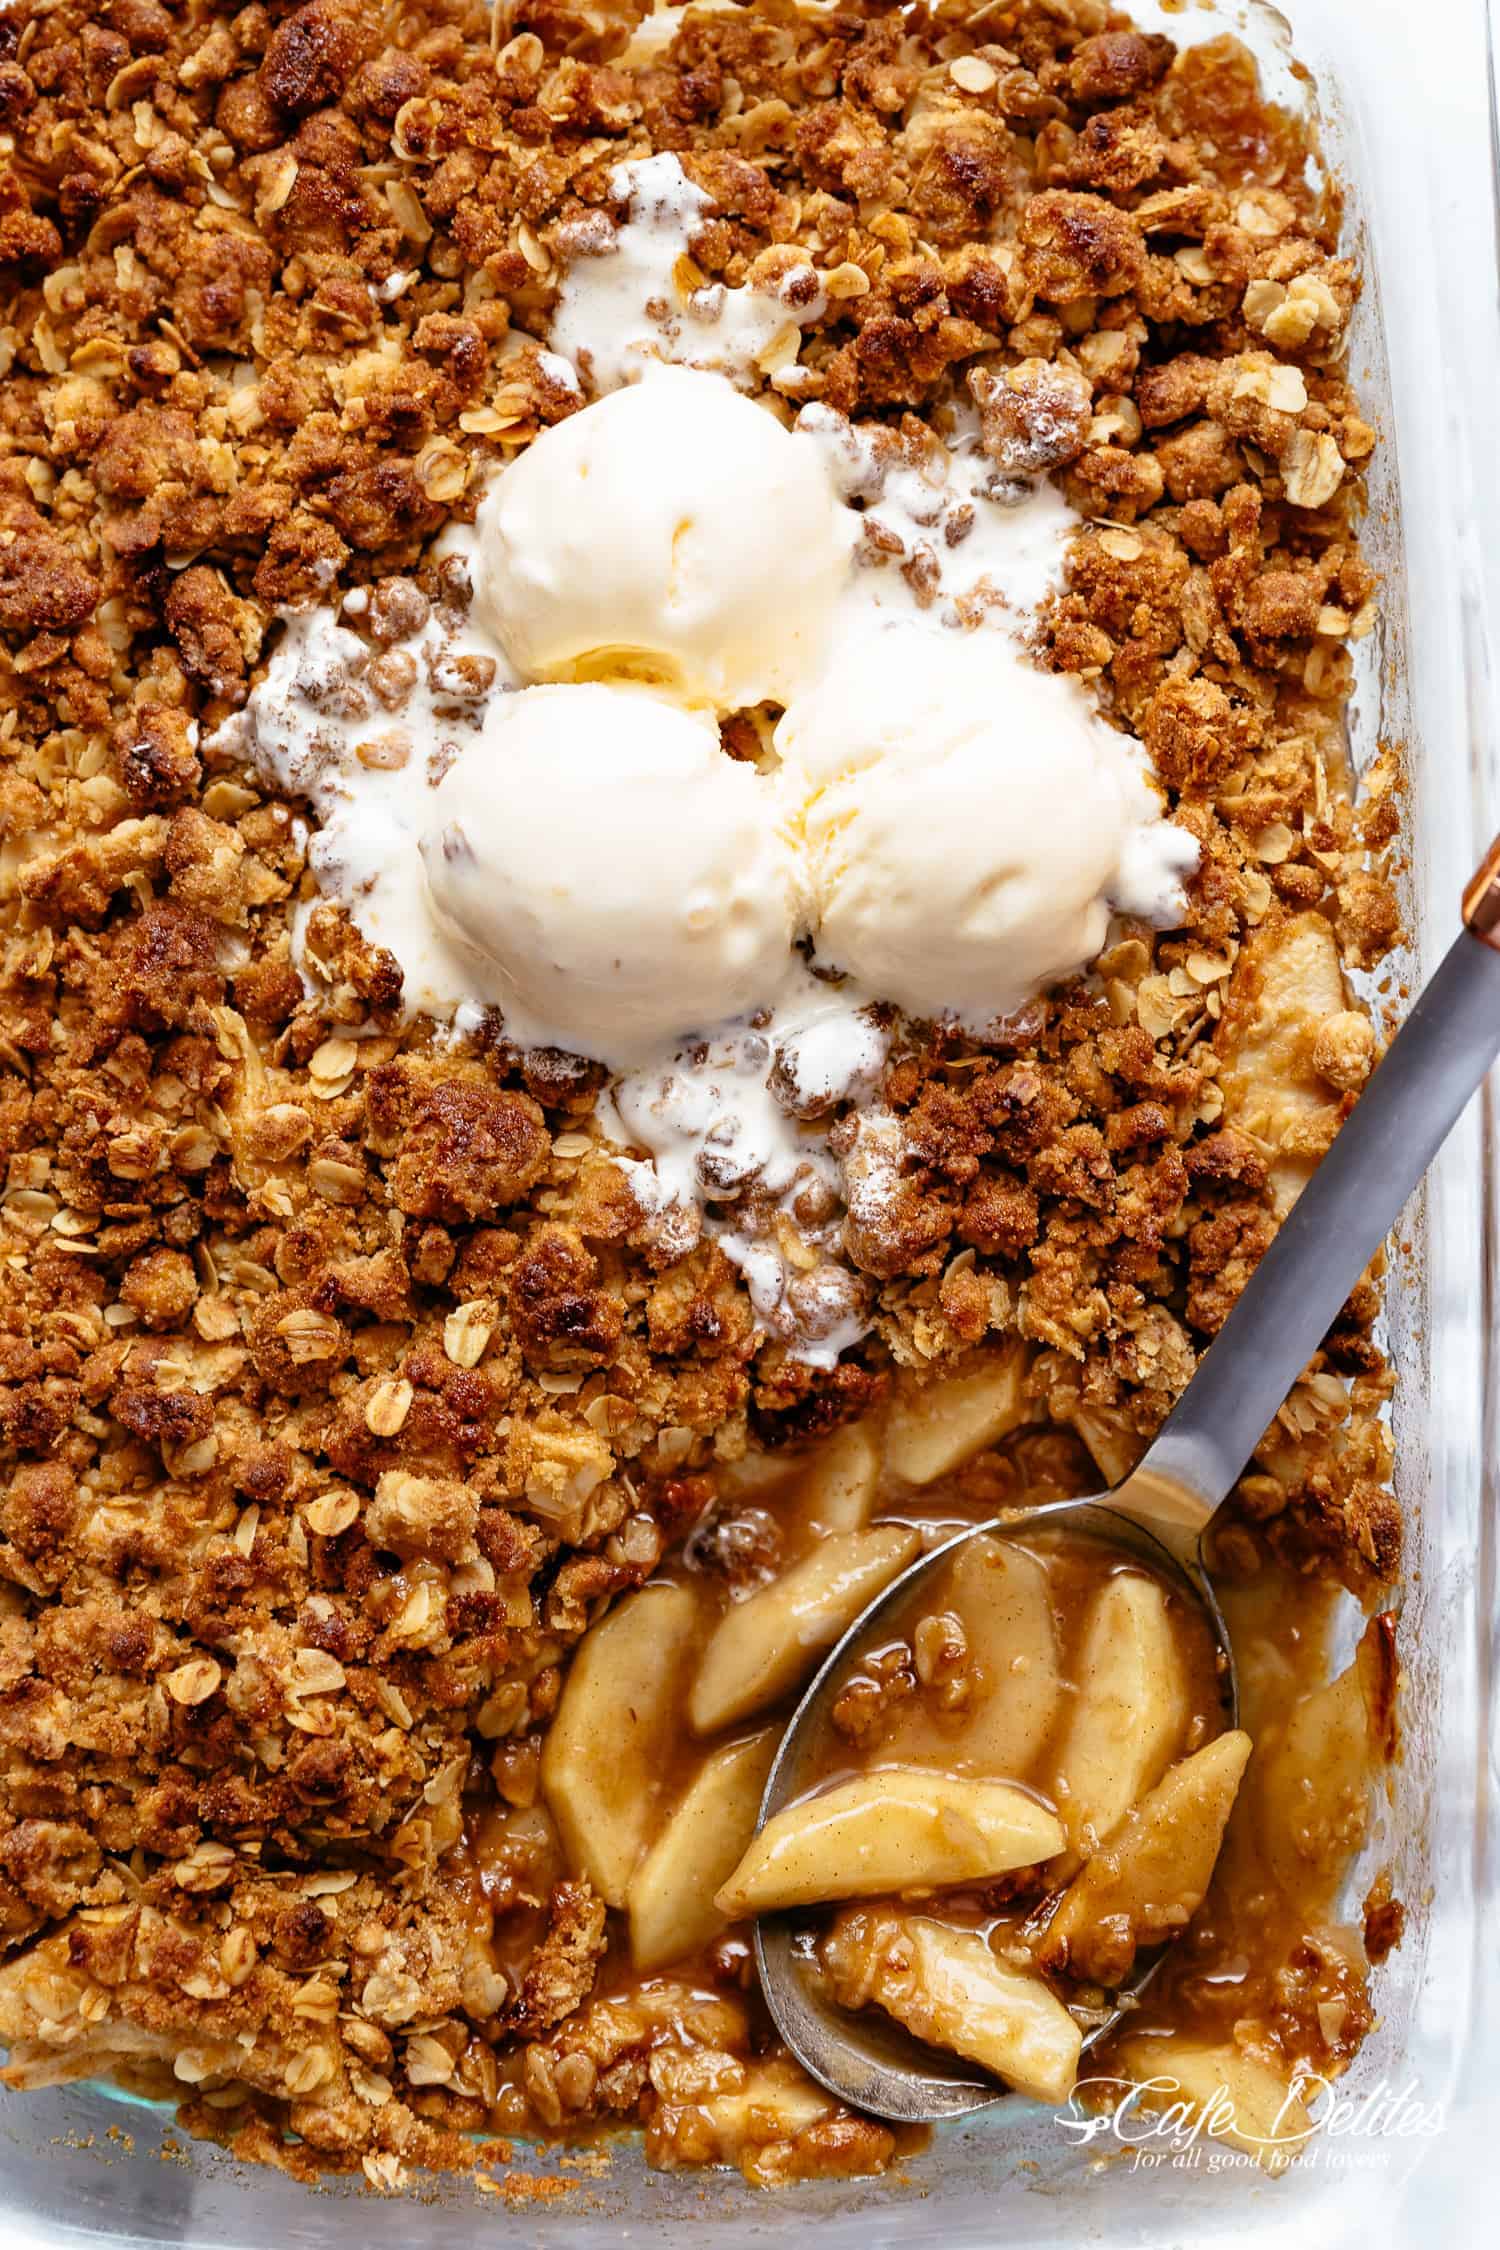 Article Title: Making the Perfect Poor Man's Apple Cobbler: Tips and Tricks